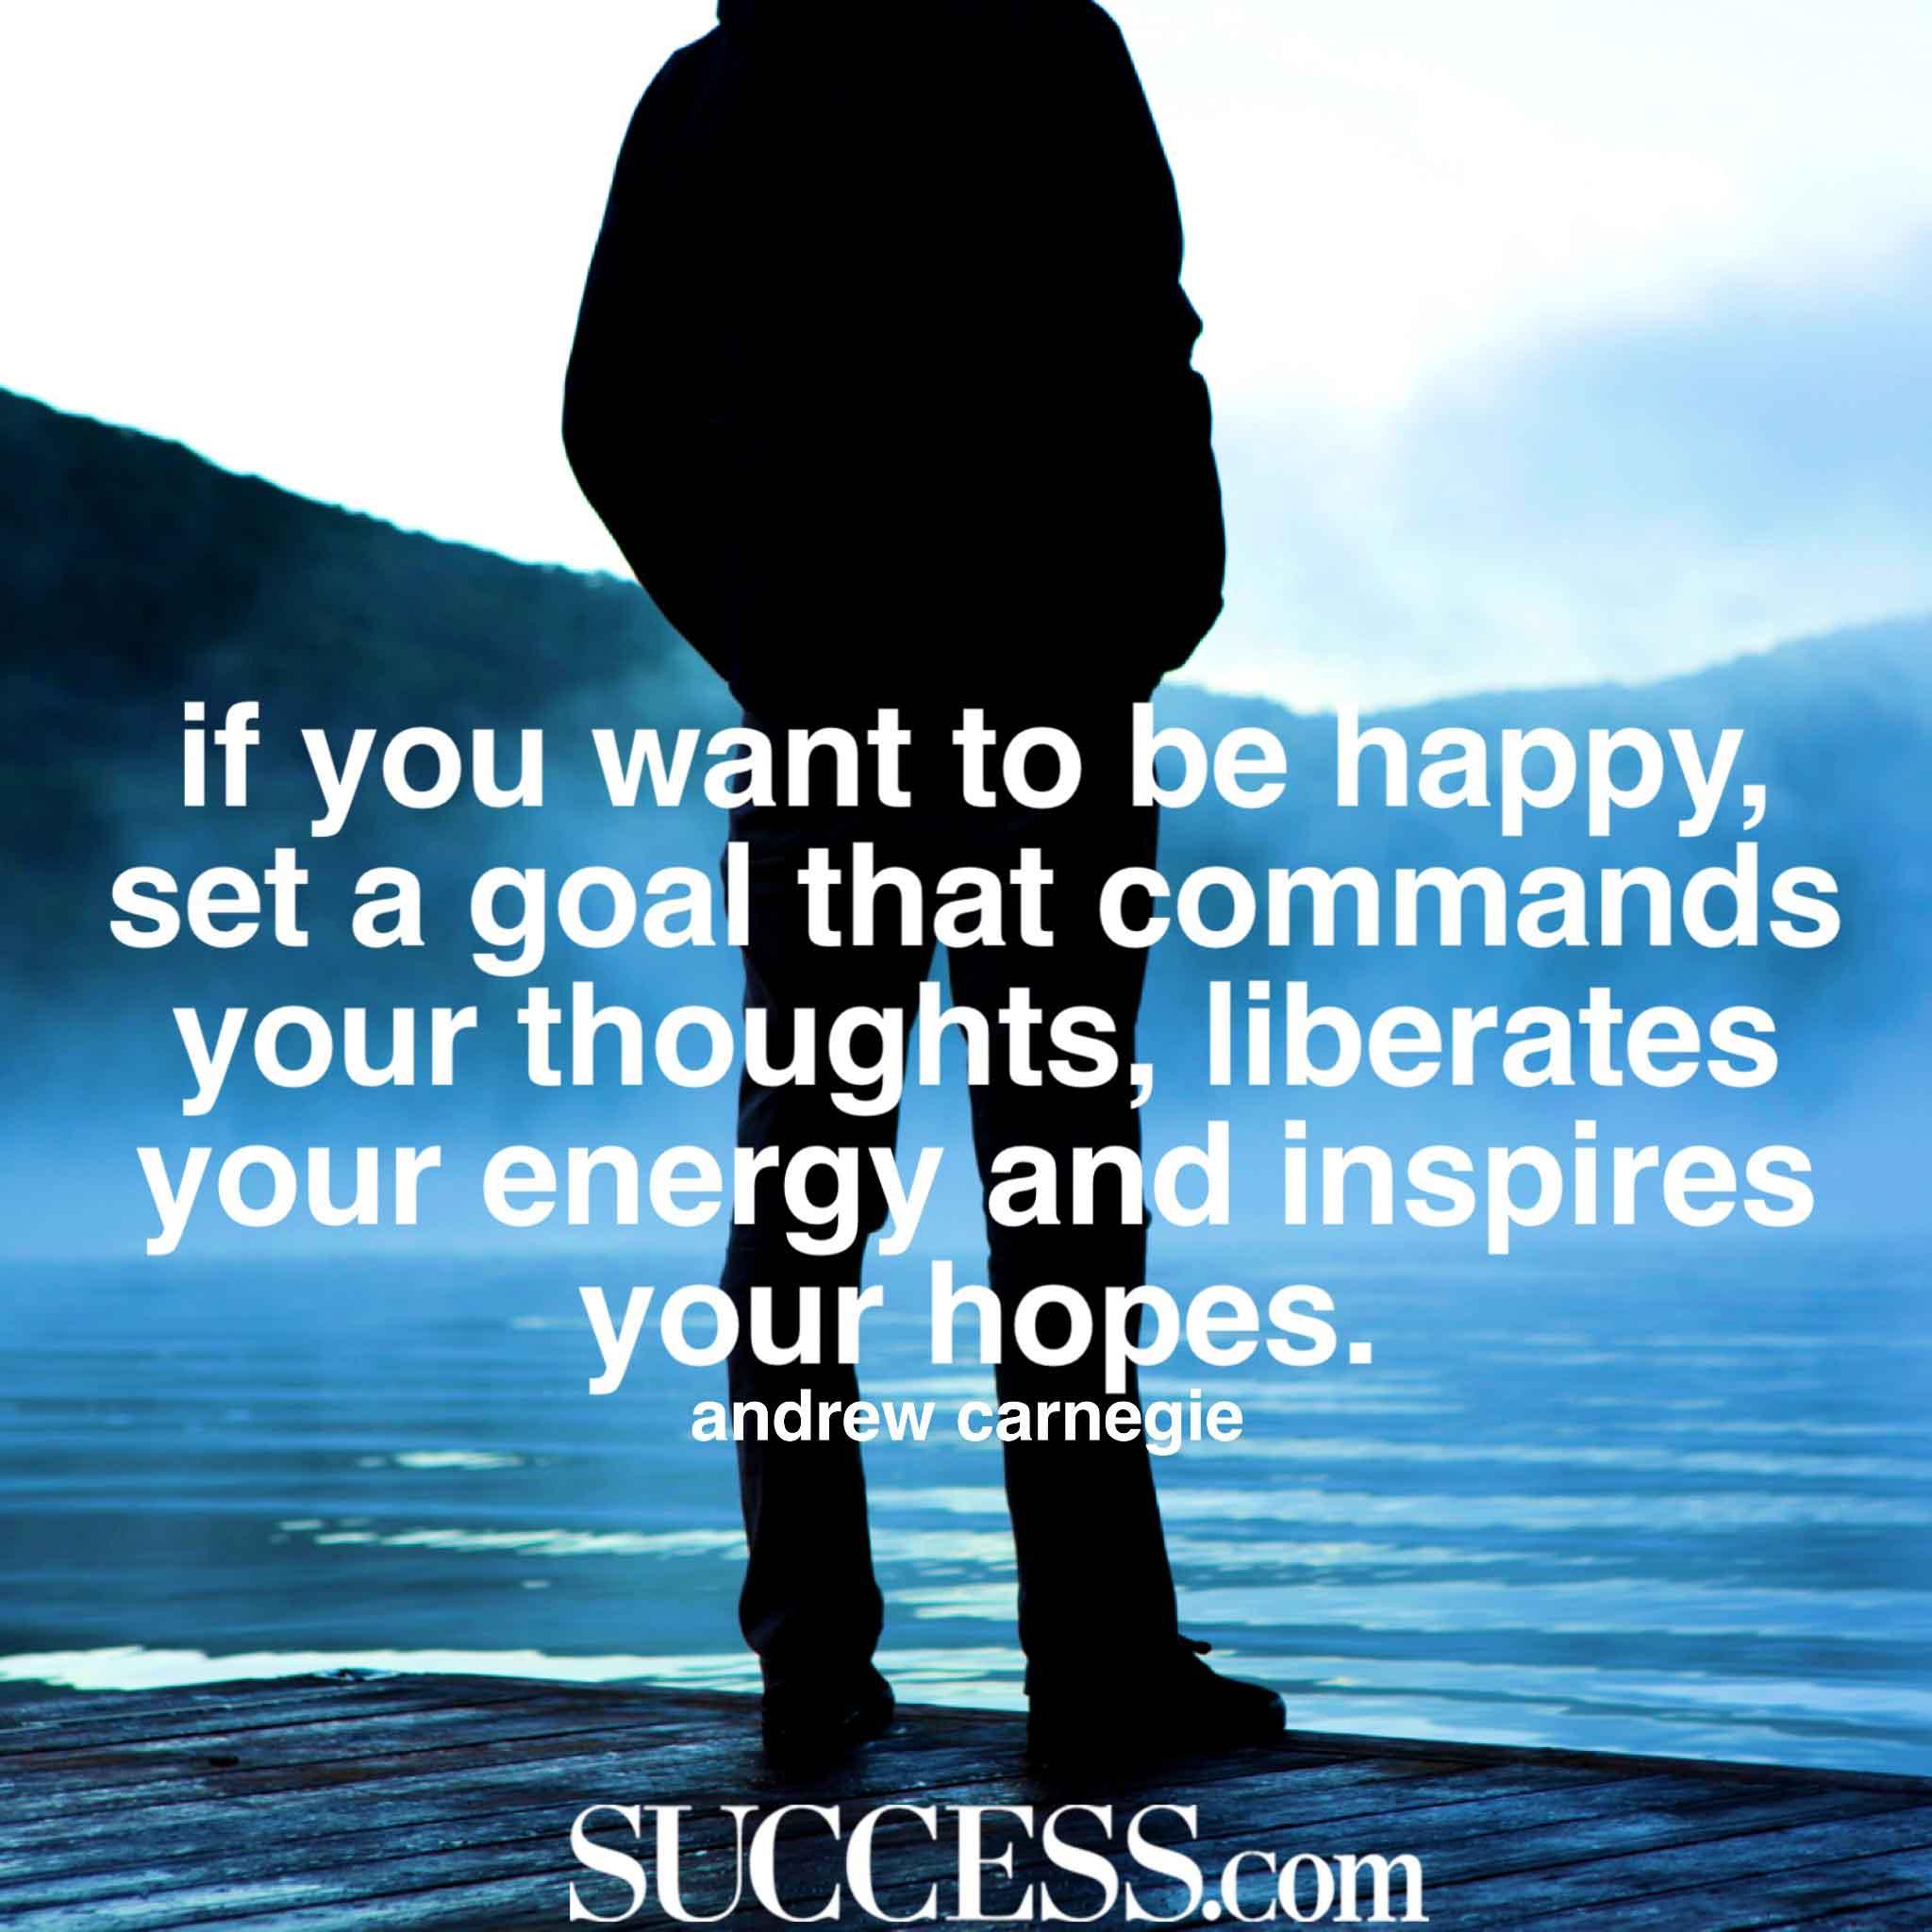 focus on the goal quotes